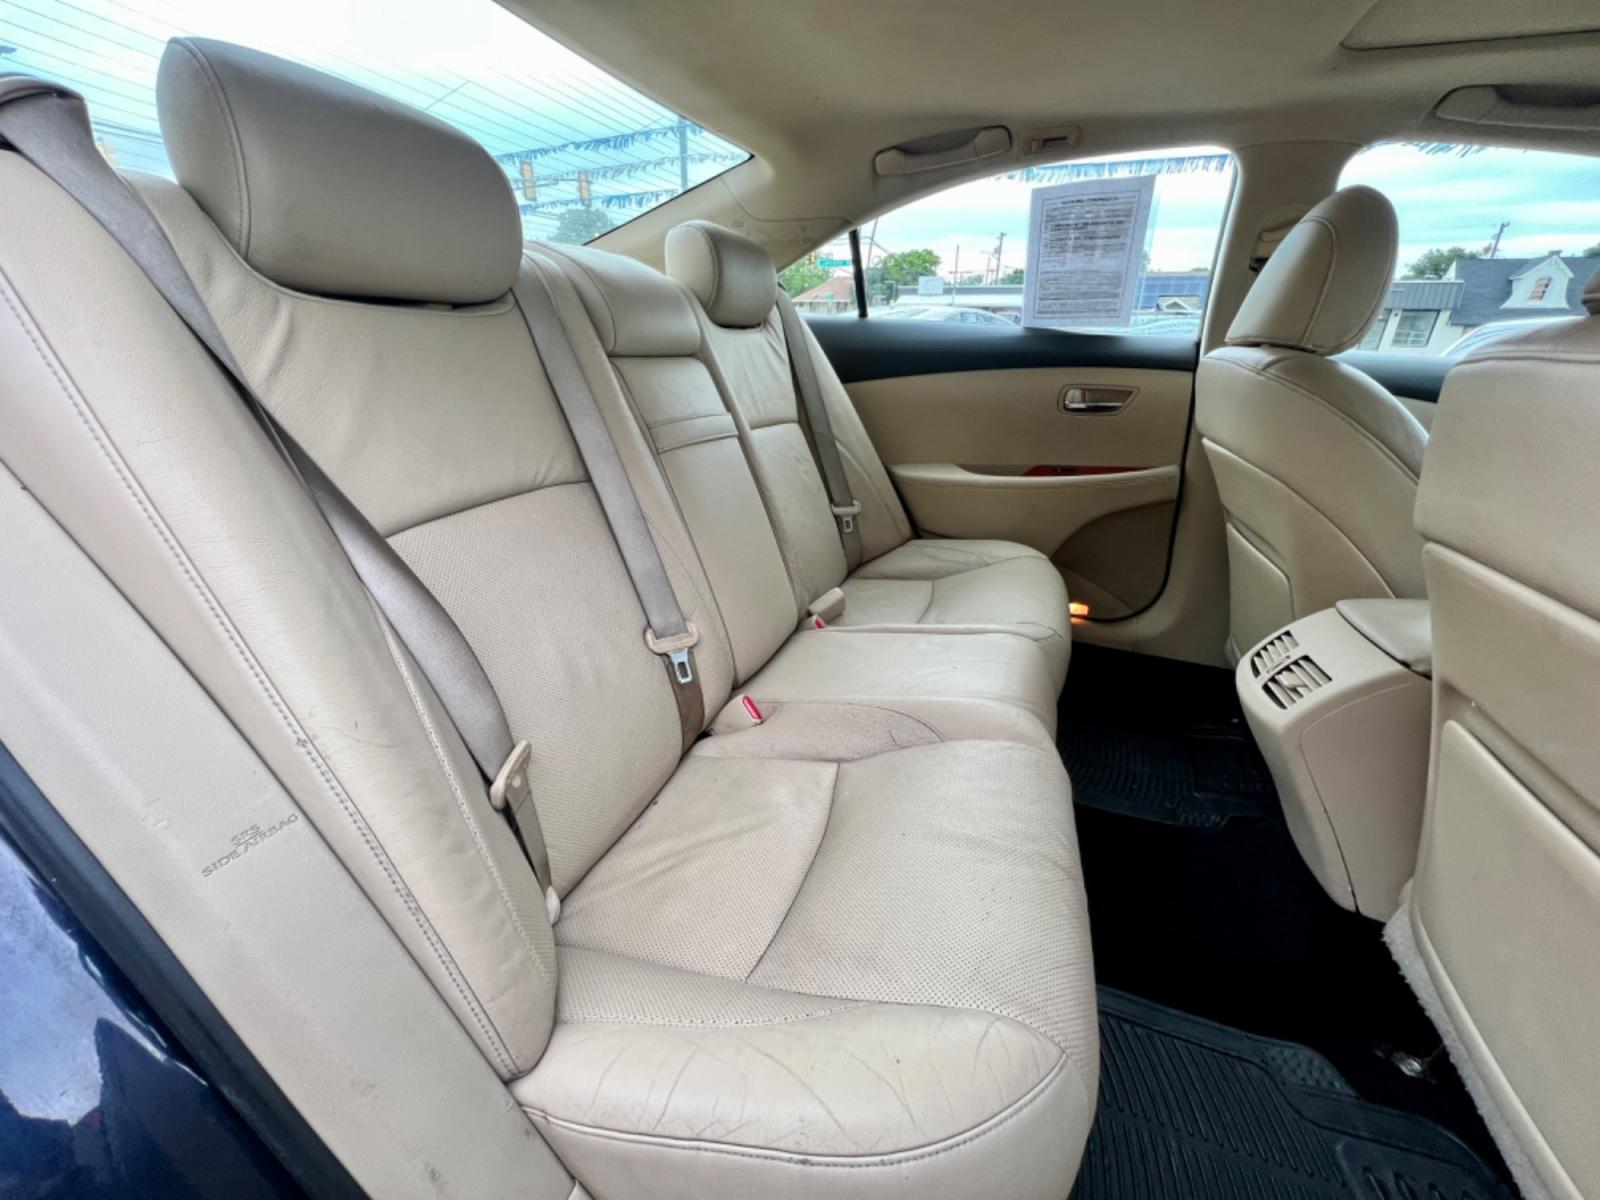 2008 BLUE LEXUS ES 350 (JTHBJ46G682) , located at 5900 E. Lancaster Ave., Fort Worth, TX, 76112, (817) 457-5456, 0.000000, 0.000000 - This is a 2008 LEXUS ES350 LUXURY 4 DR SEDAN that is in excellent condition. The interior is clean with no rips or tears or stains. All power windows, door locks and seats. Ice cold AC for those hot Texas summer days. It is equipped with a CD player, AM/FM radio. It runs and drives like new. The tir - Photo #15